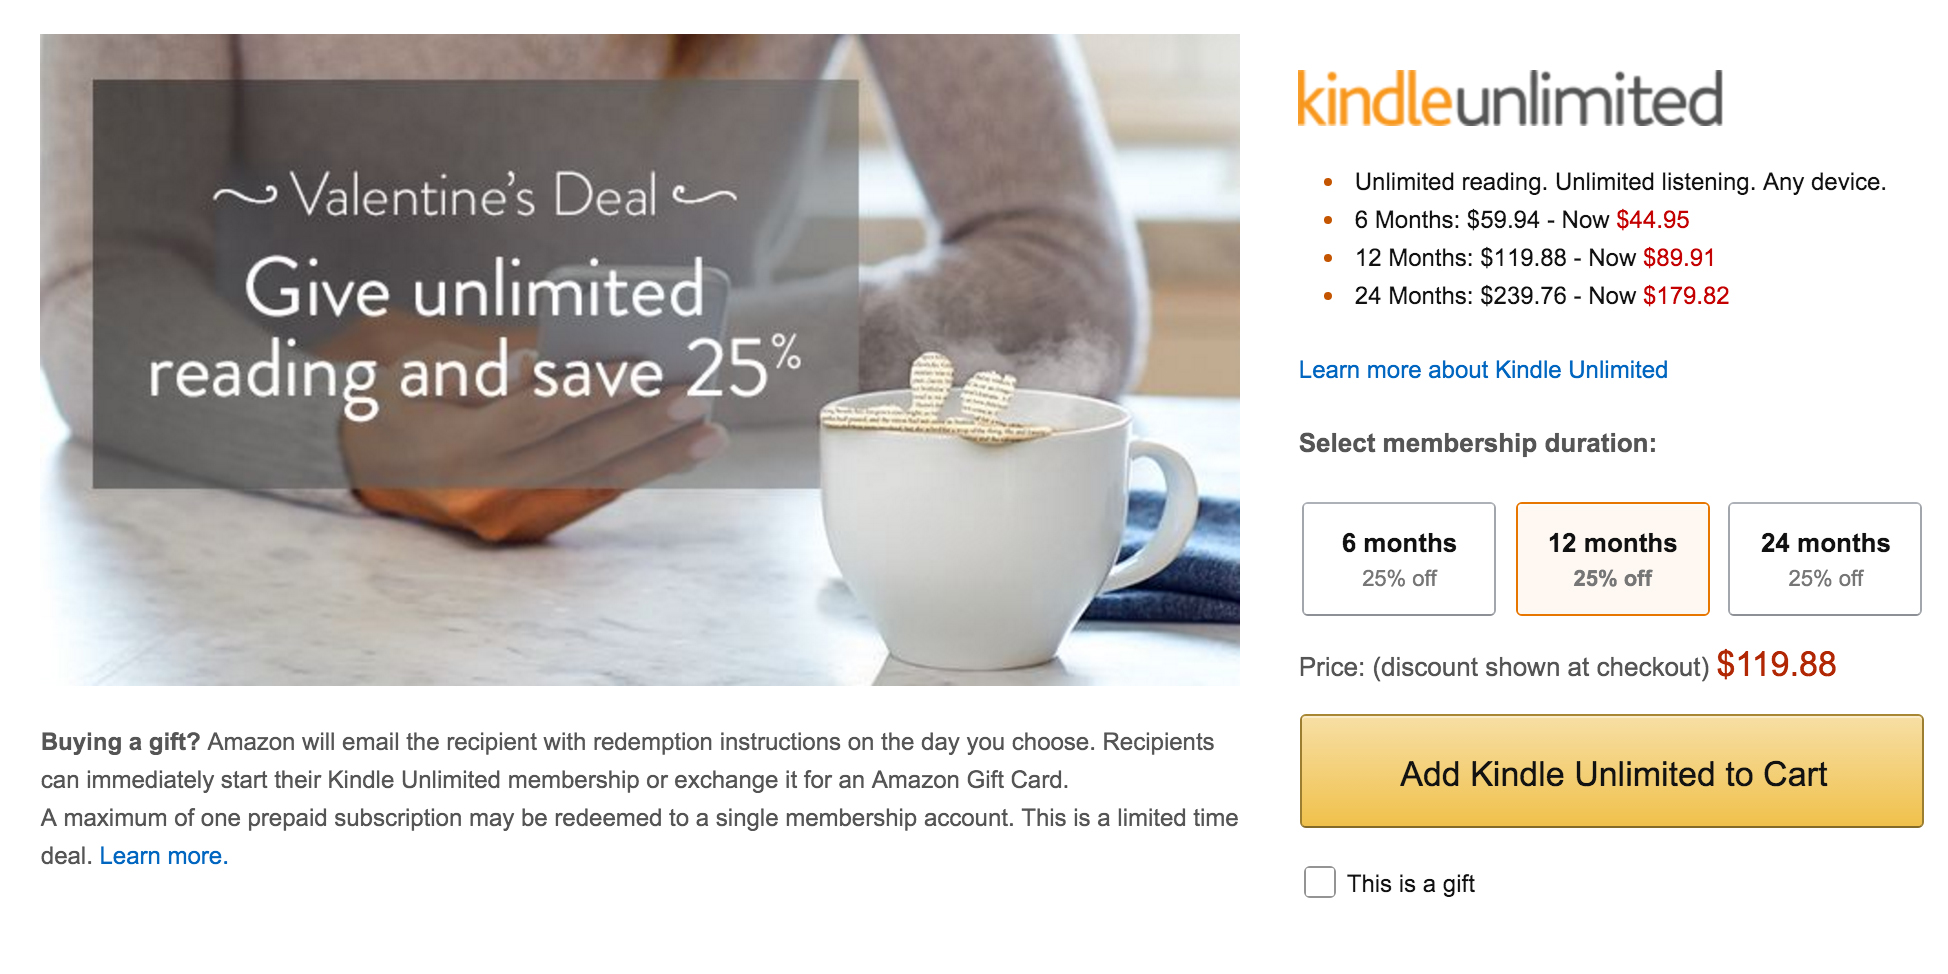 Amazon offers rare 25 discount on Kindle Unlimited subscriptions 6months 45 (Reg. 60), more